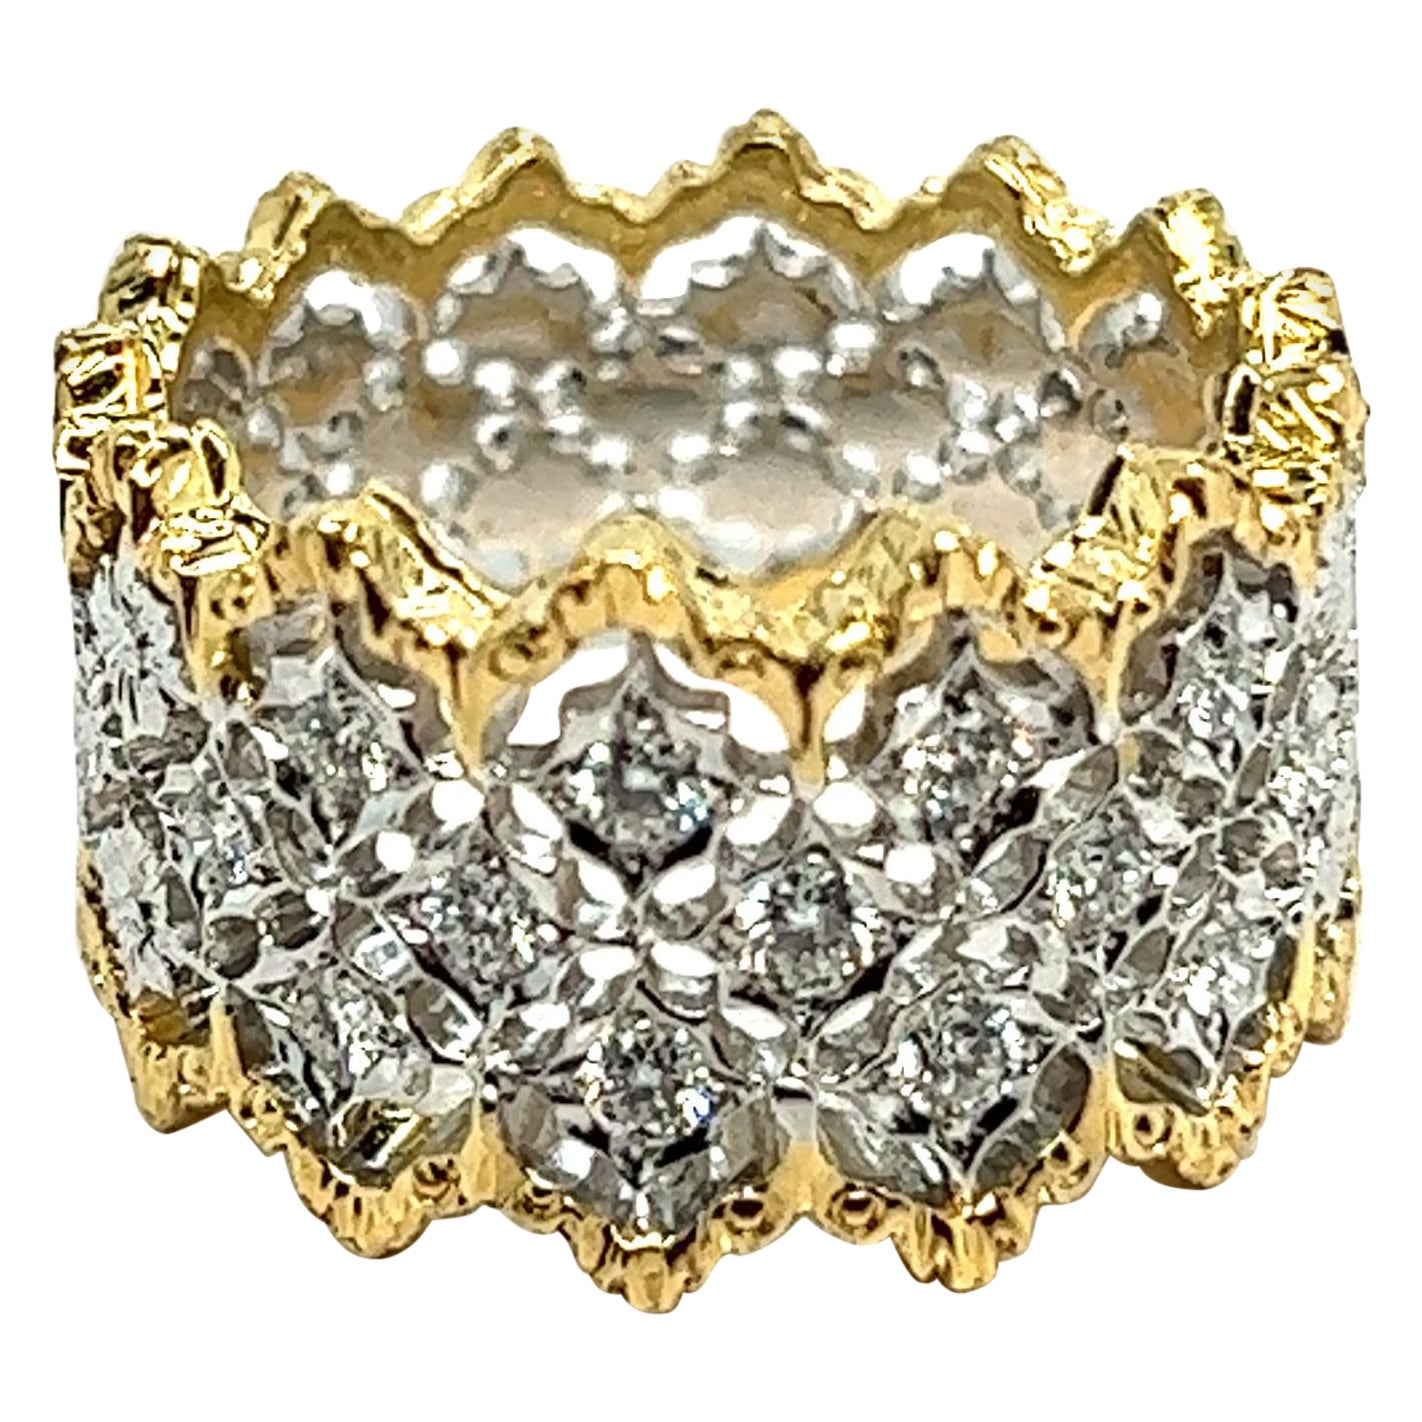 Baroque Lace Ring with 13 Brilliant Cut Diamonds in 18K White and Yellow Gold